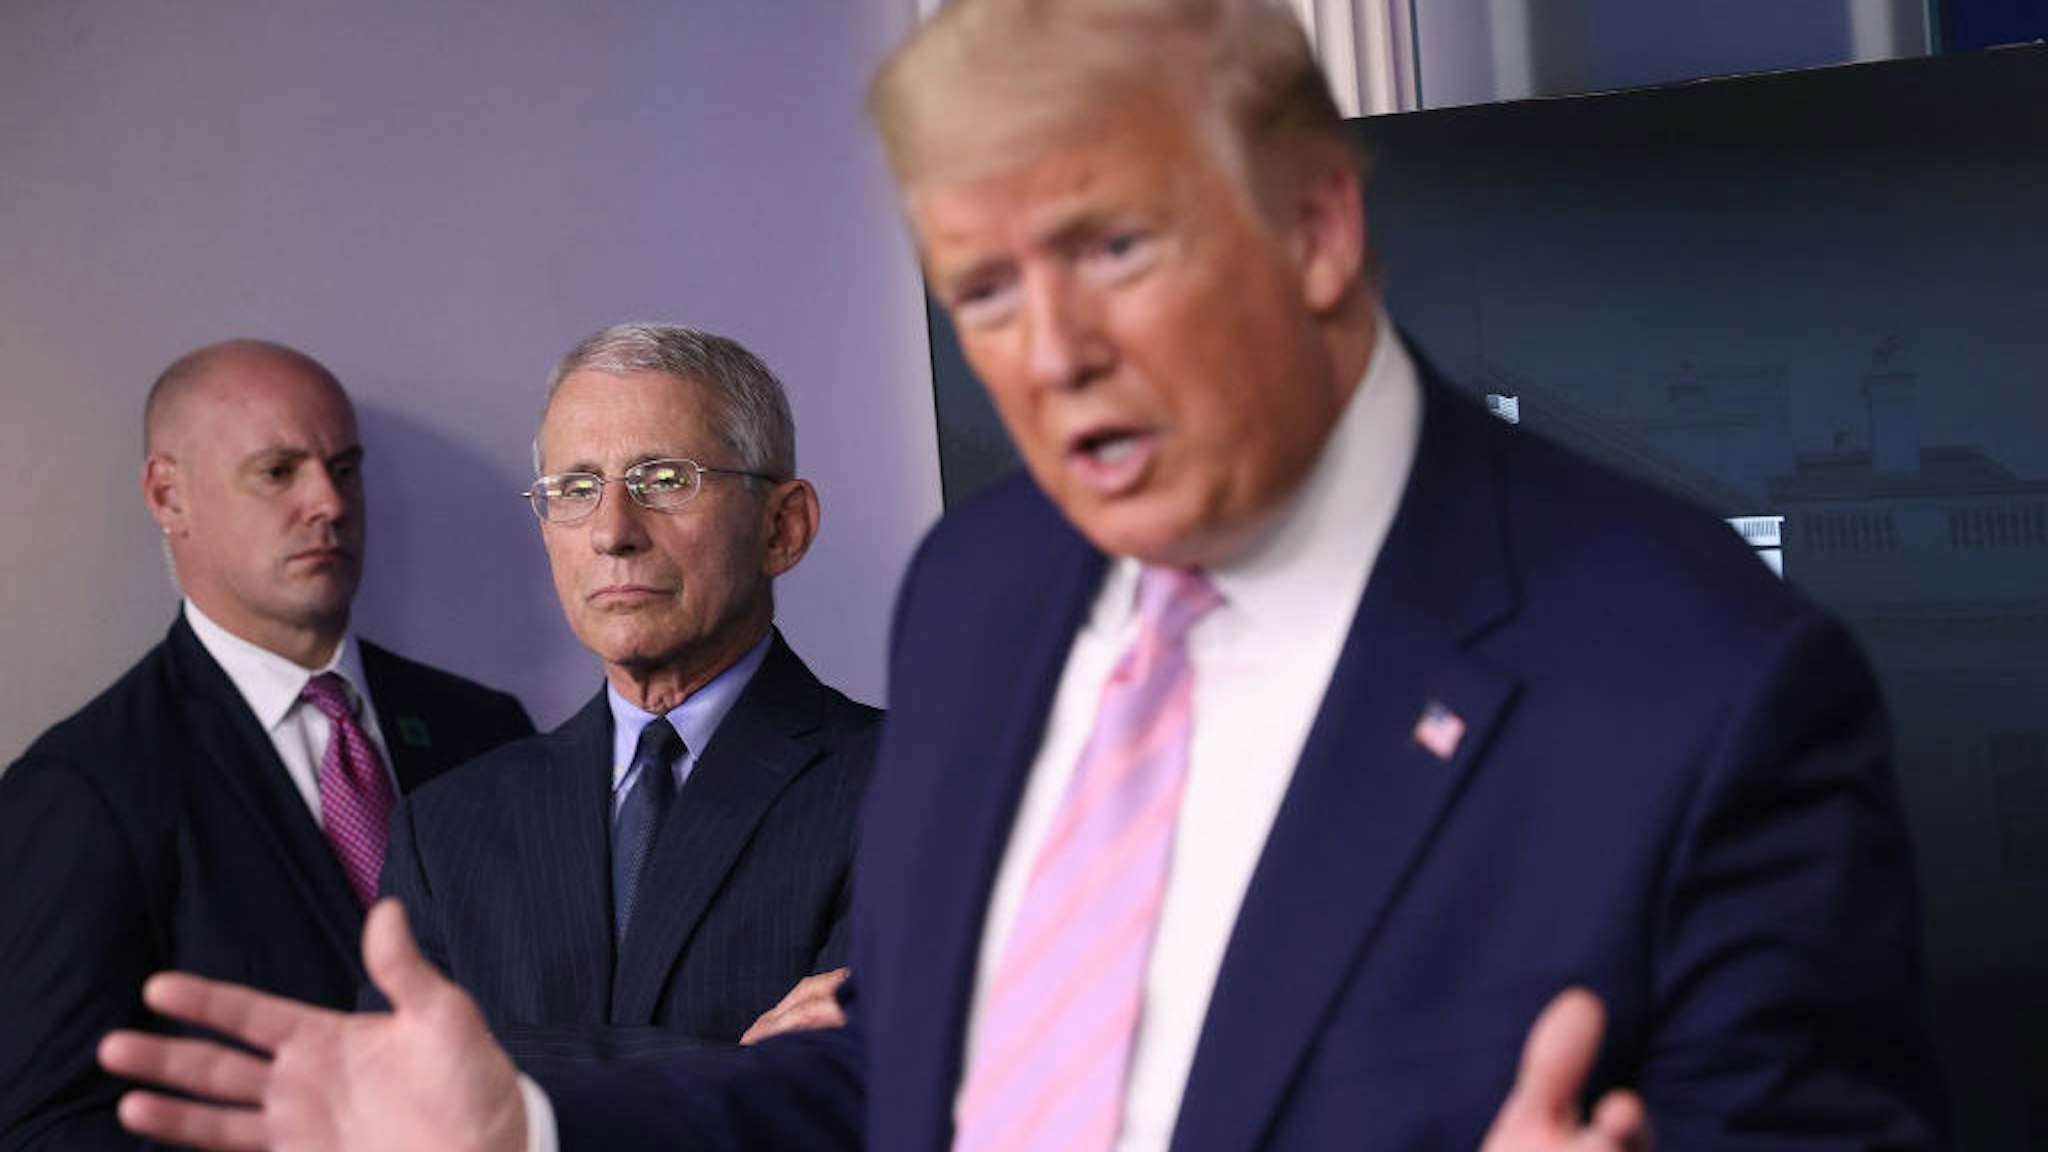 Dr. Anthony Fauci (C) director of the National Institute of Allergy and Infectious Diseases, listens to U.S. President Donald Trump speak from the press briefing room with members of the White House Coronavirus Task Force April 1, 2020 in Washington, DC. After announcing yesterday that COVID-19 could kill between 100,000 and 240,000 Americans, the Trump administration is also contending with the economic effects of the outbreak as the stock market continues to fall, businesses remain closed, and companies lay off and furlough employees. (Photo by Win McNamee/Getty Images)